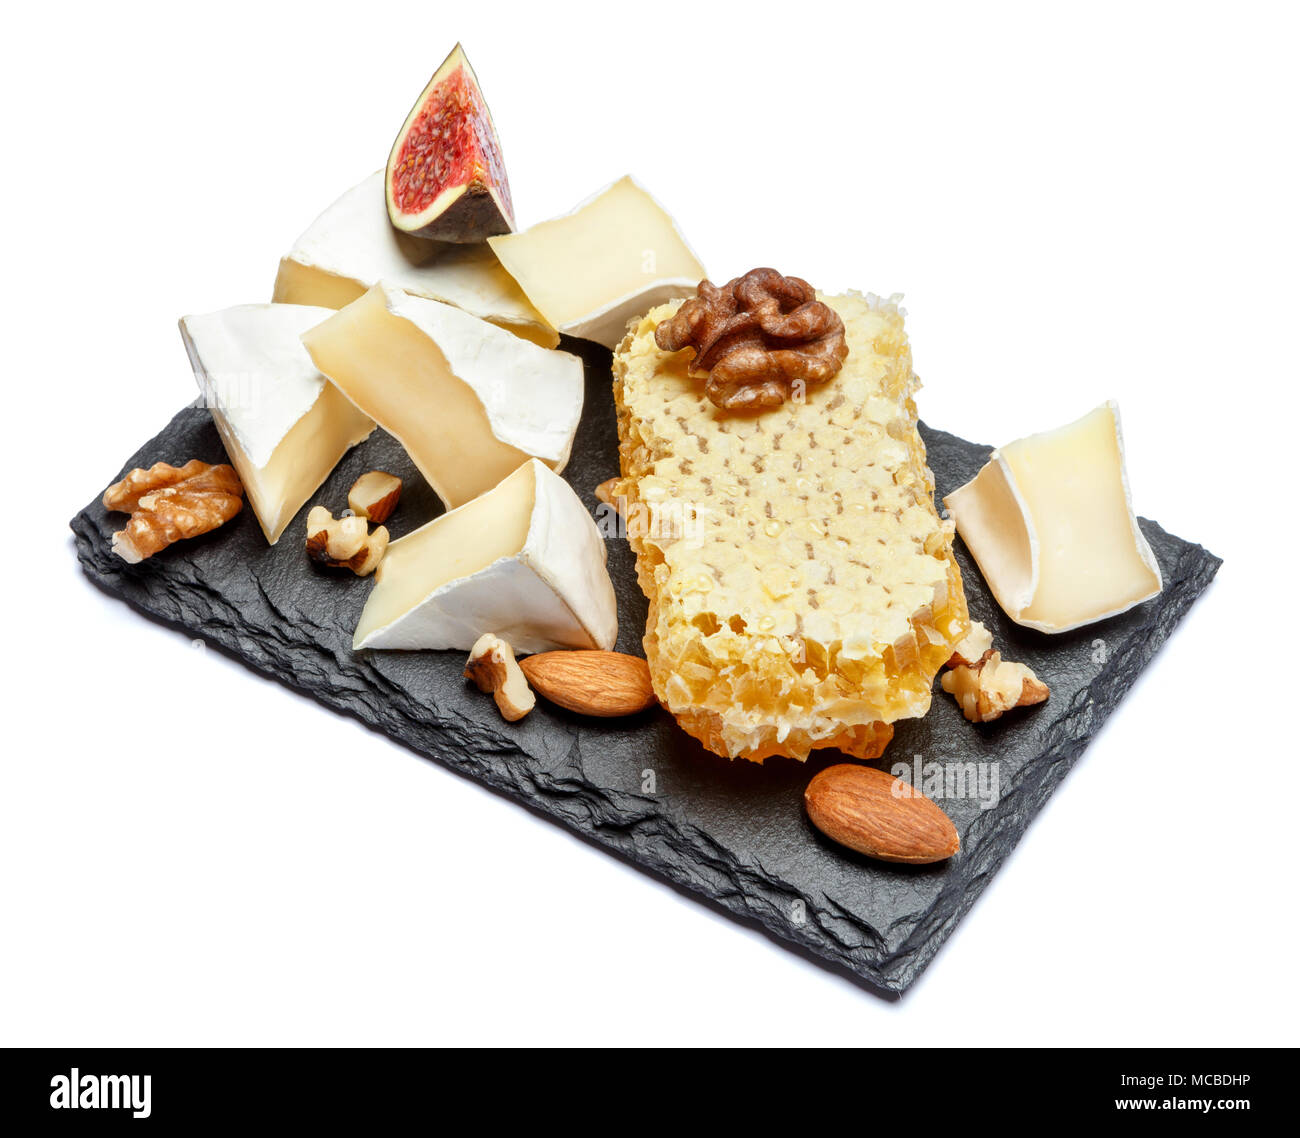 Camembert cheese with honey, figs, walnuts on stone board Stock Photo